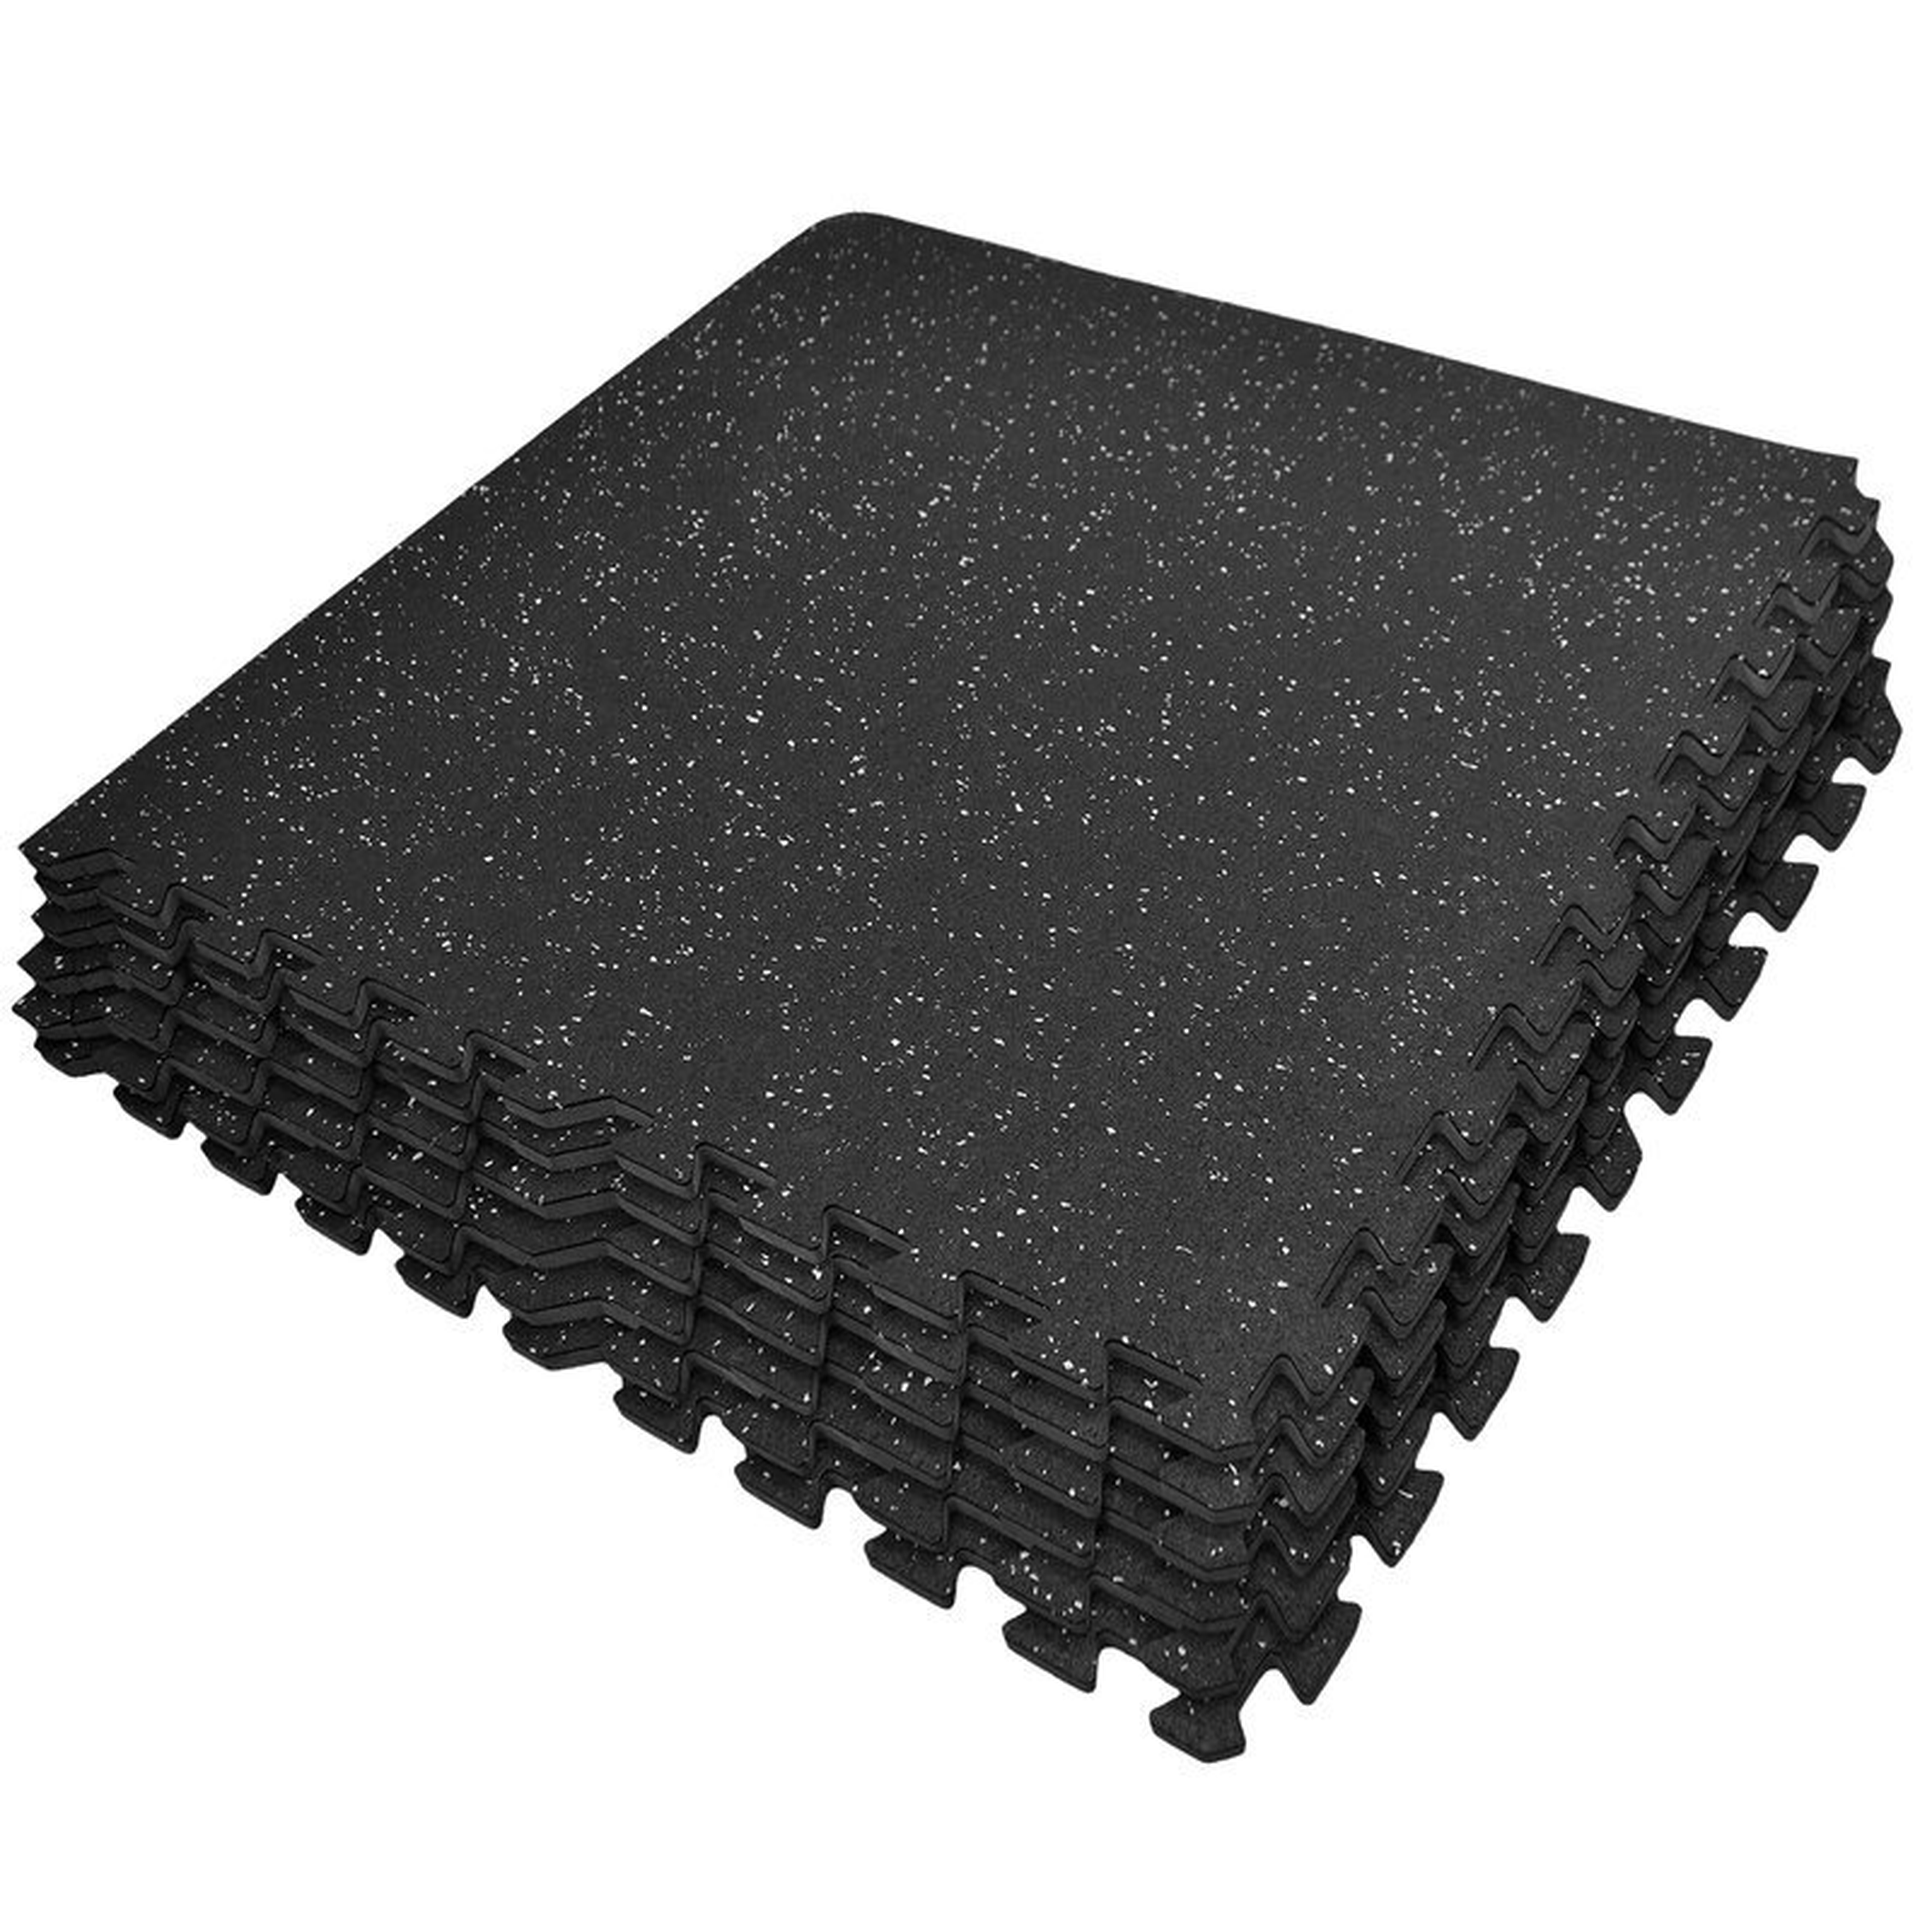 25'' L x 24'' W x 0.5'' Rubber Tile (Set of 6) See More by Sivan Health and Fitness - Wayfair